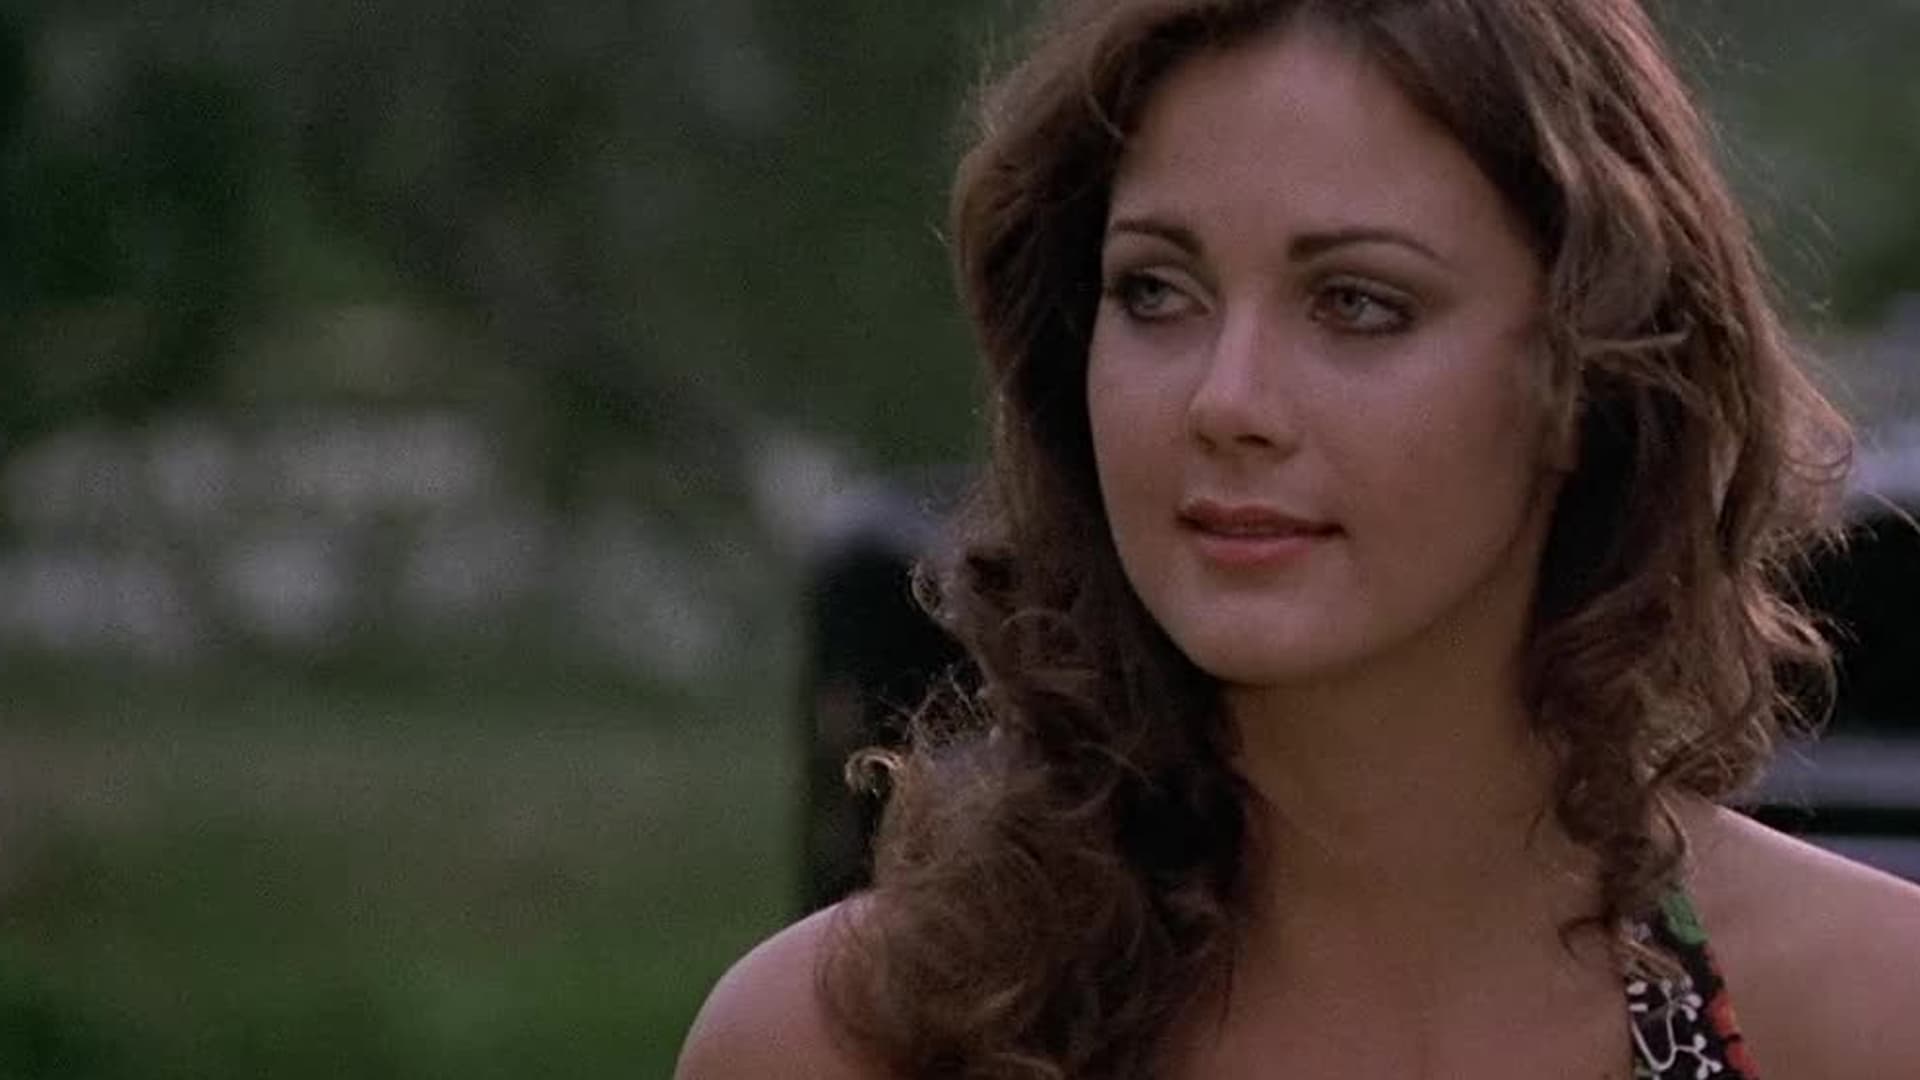 Lynda carter in bobbie jo and the outlaw